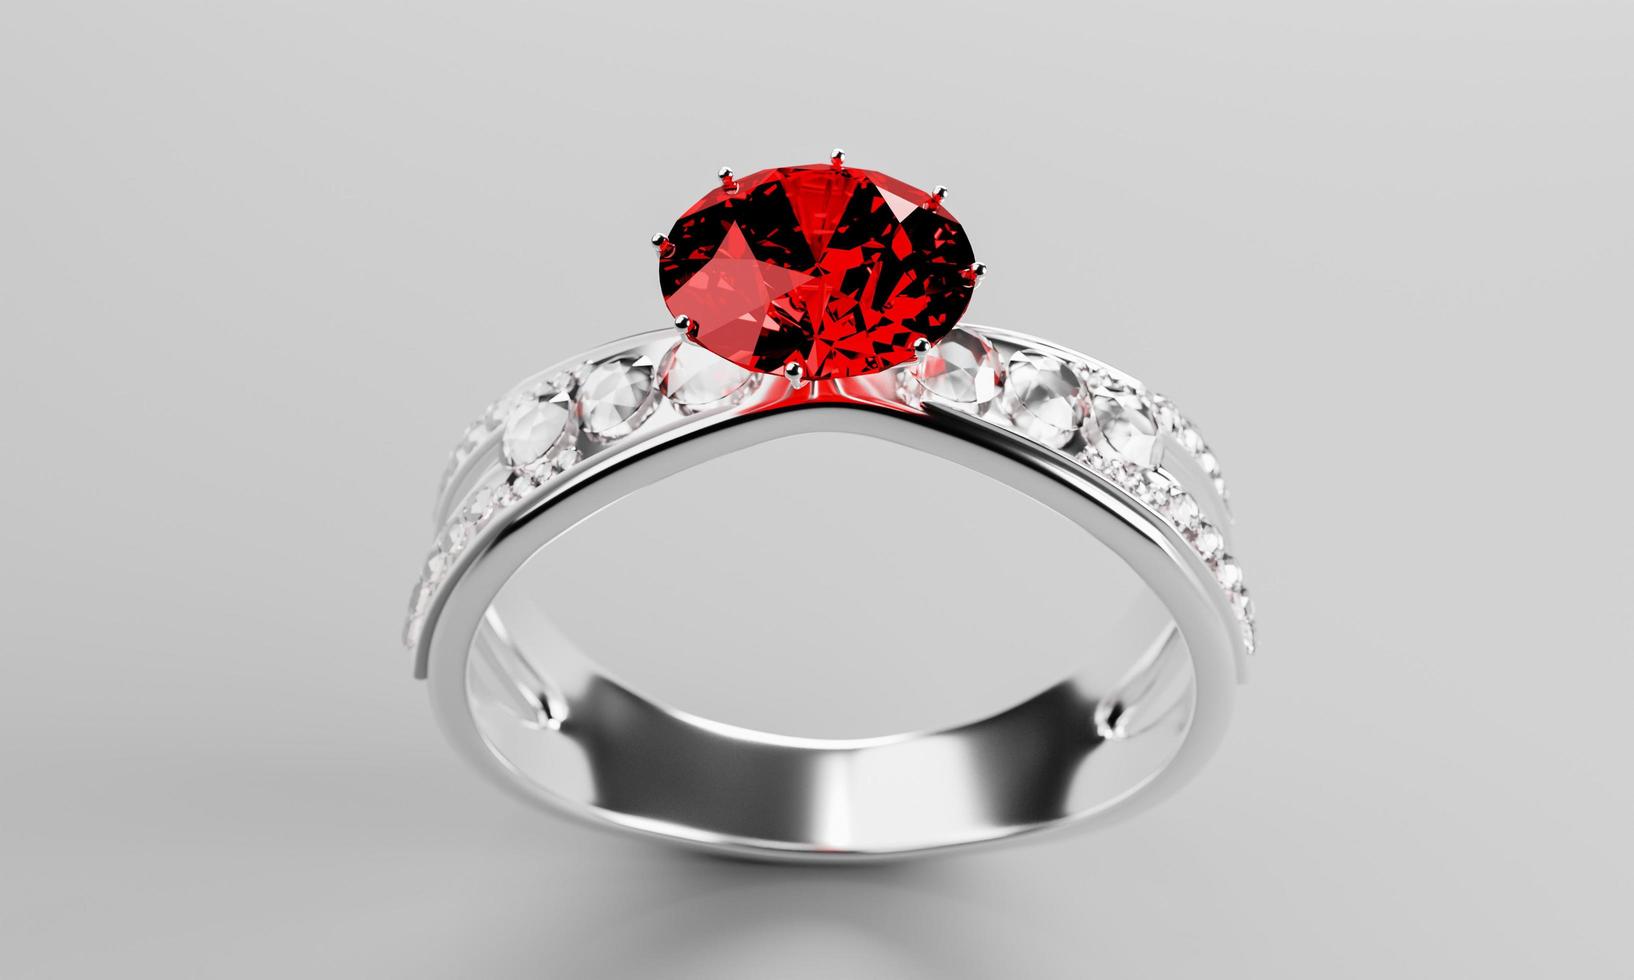 The large red diamond or ruby is surrounded by many diamonds on the ring made of platinum gold placed on a gray background. Elegant wedding diamond ring for women.  3d rendering photo